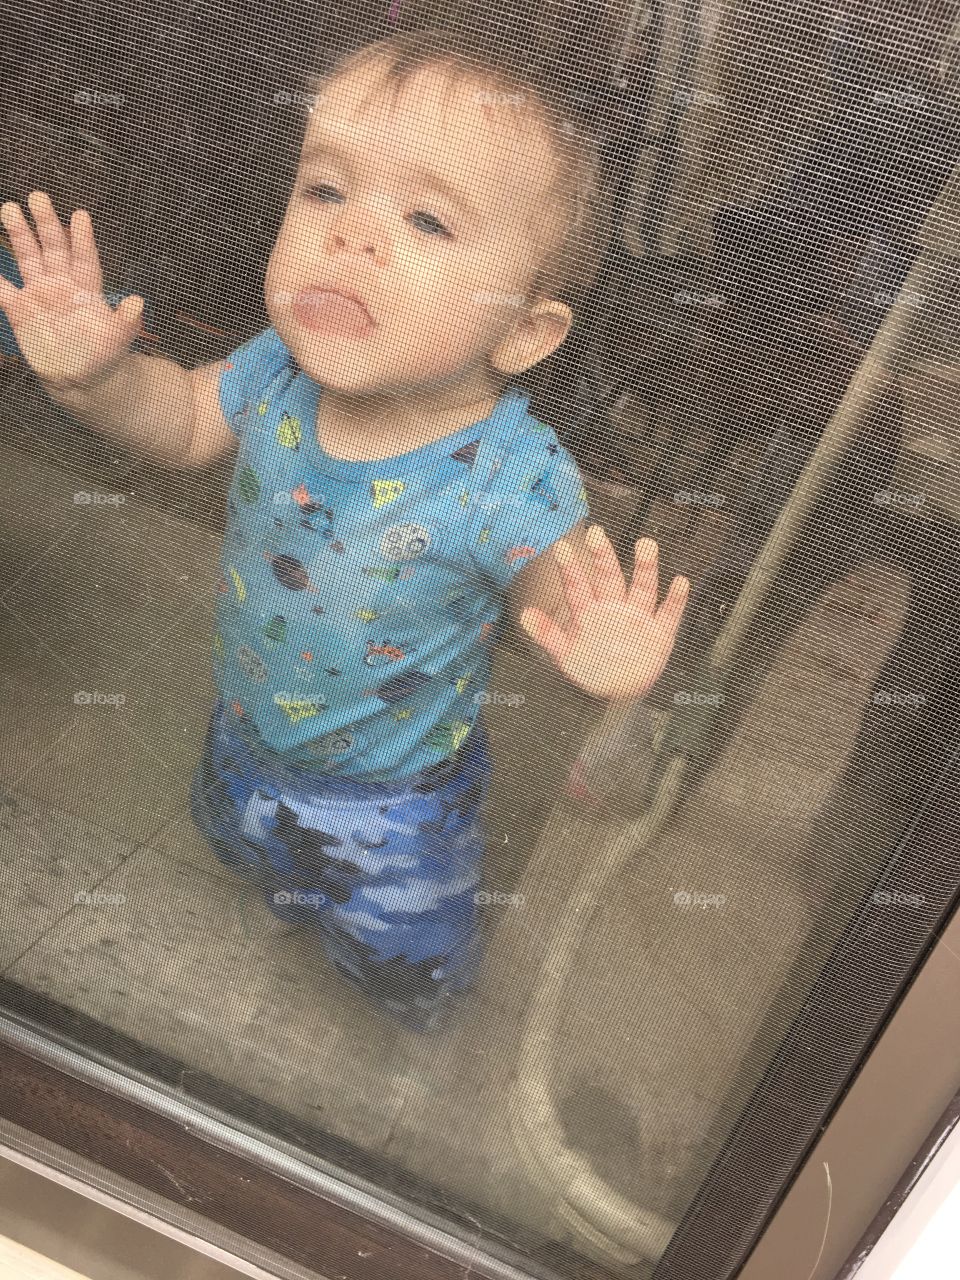 My son making funny faces through the window while I was outside.  